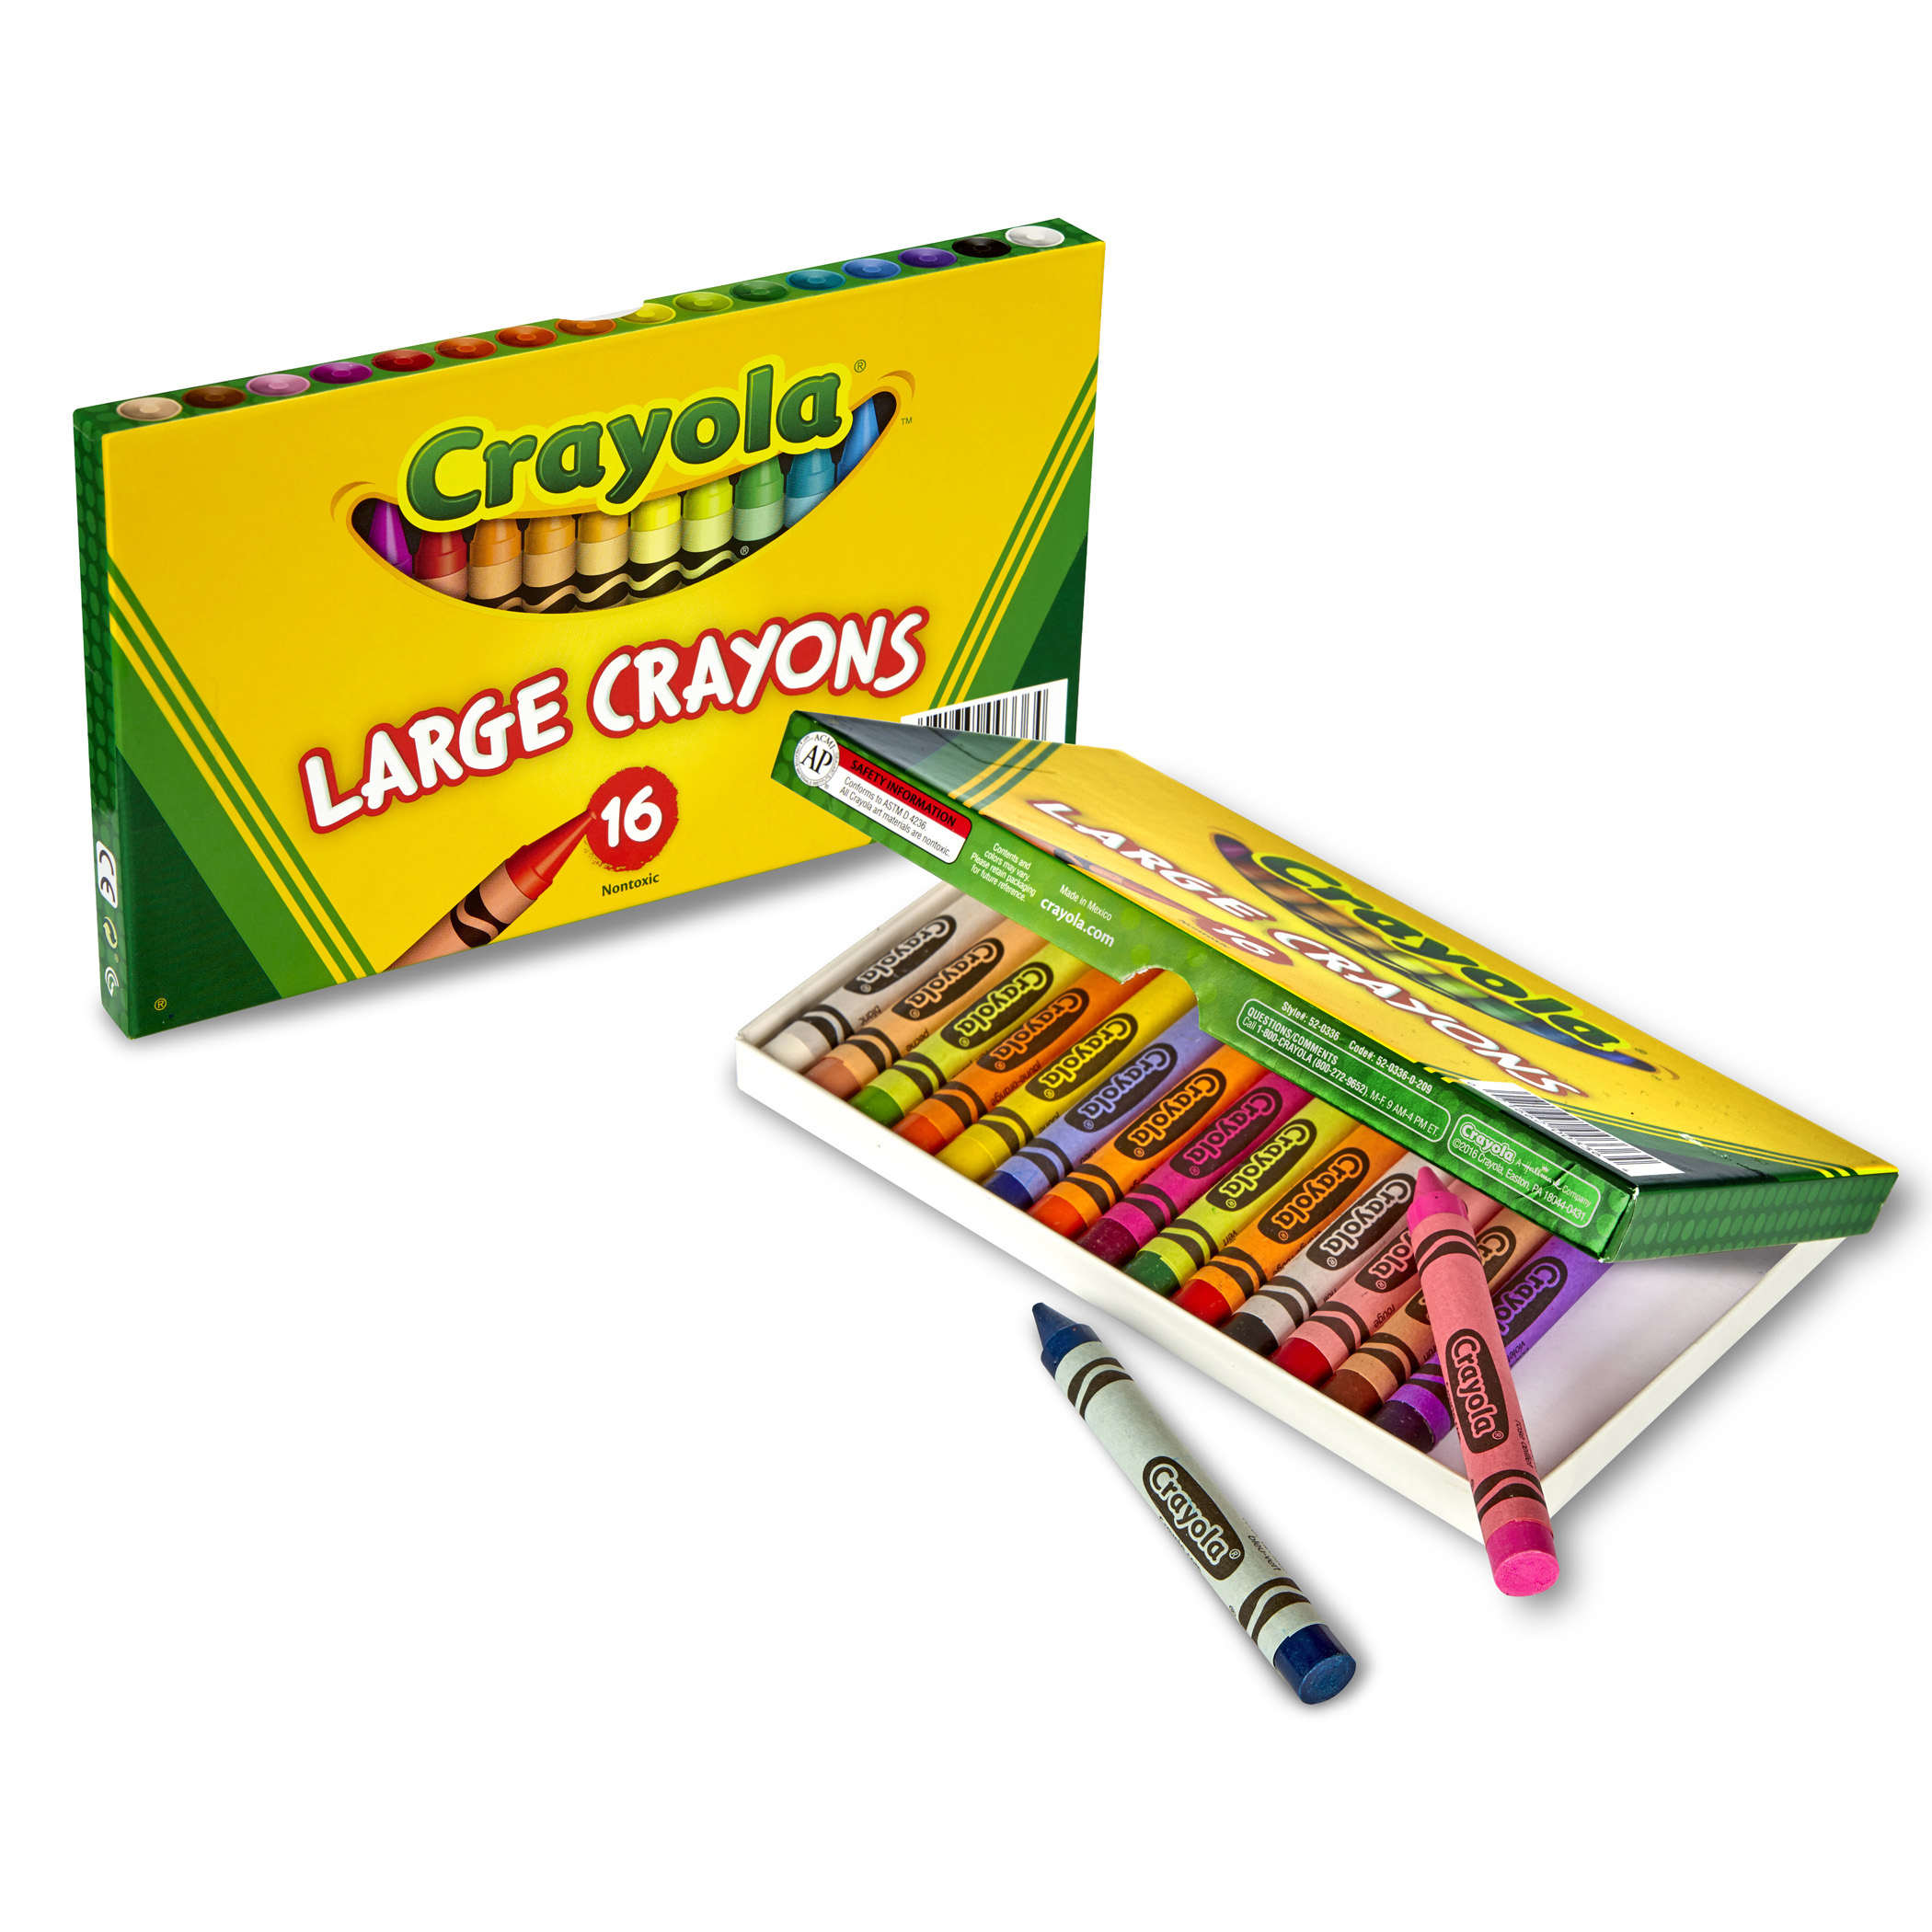 16 Large Crayons - The Teachers Outlet